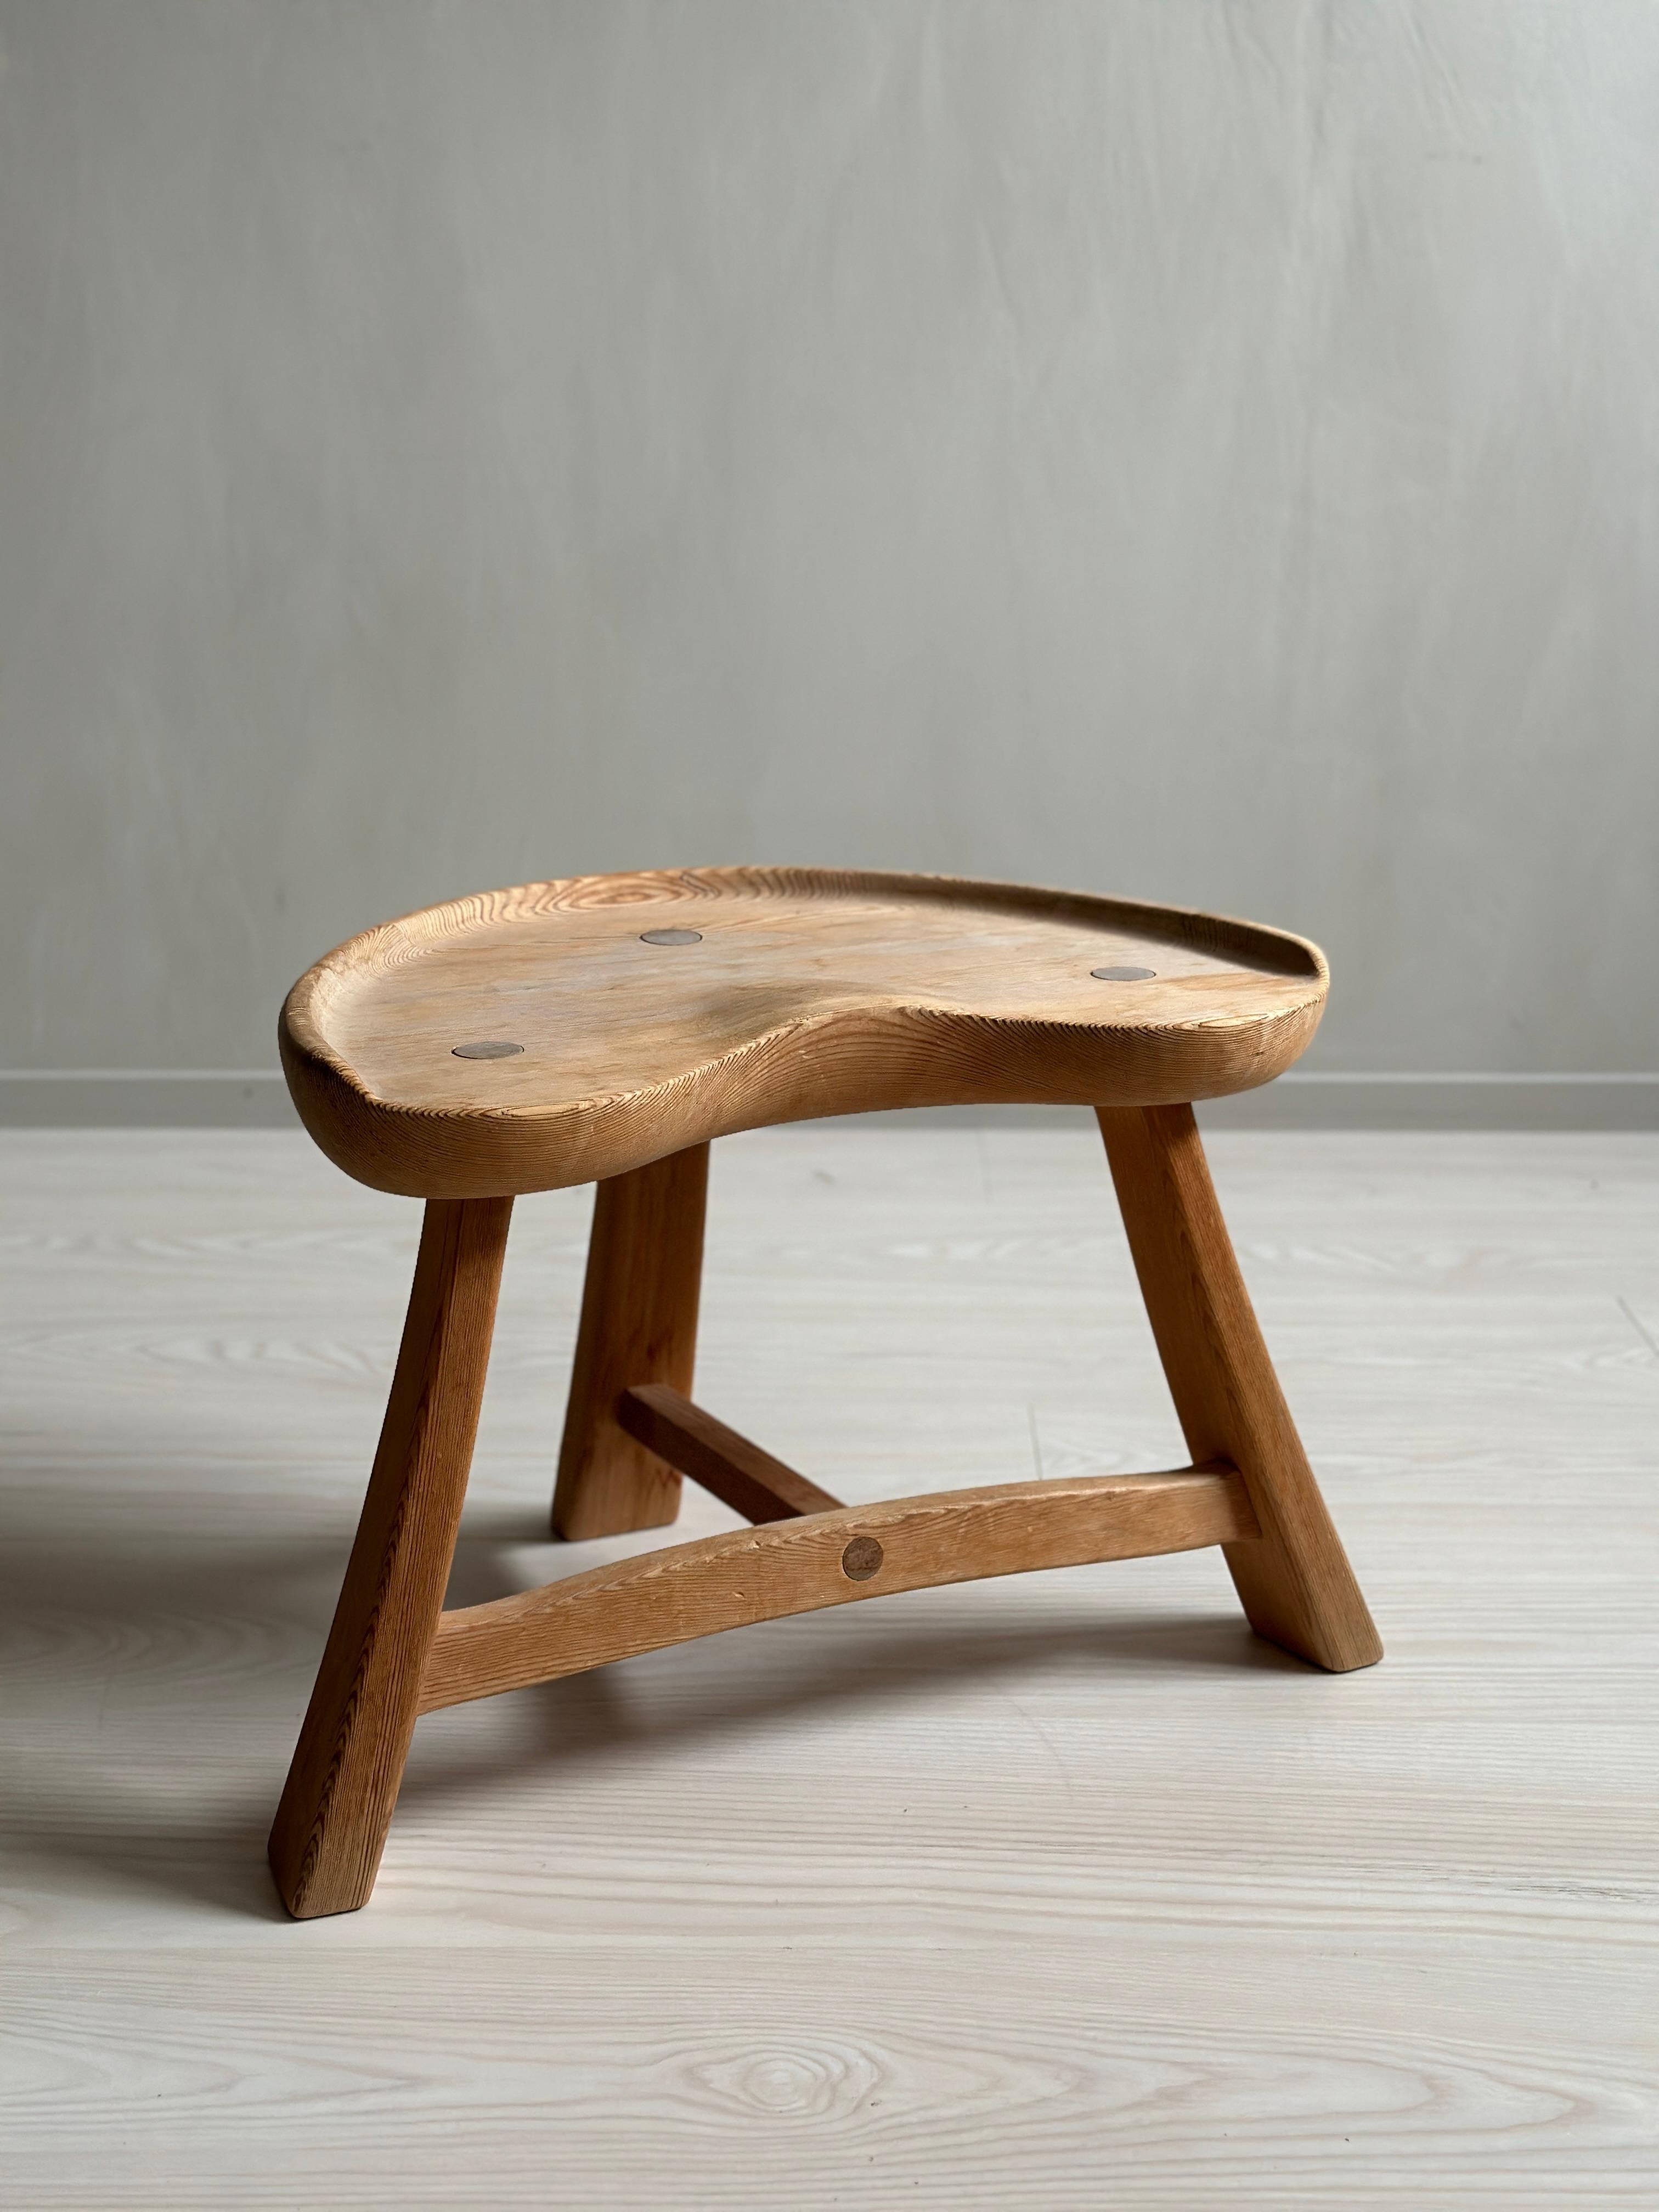 Introducing a beautifully crafted three-legged pine stool, model no. 522 by Krogenæs Møbler. This stunning piece of furniture was designed in Norway in 1964 by none other than the factory owner himself, Rangvald Krogenæs. The stool, known as